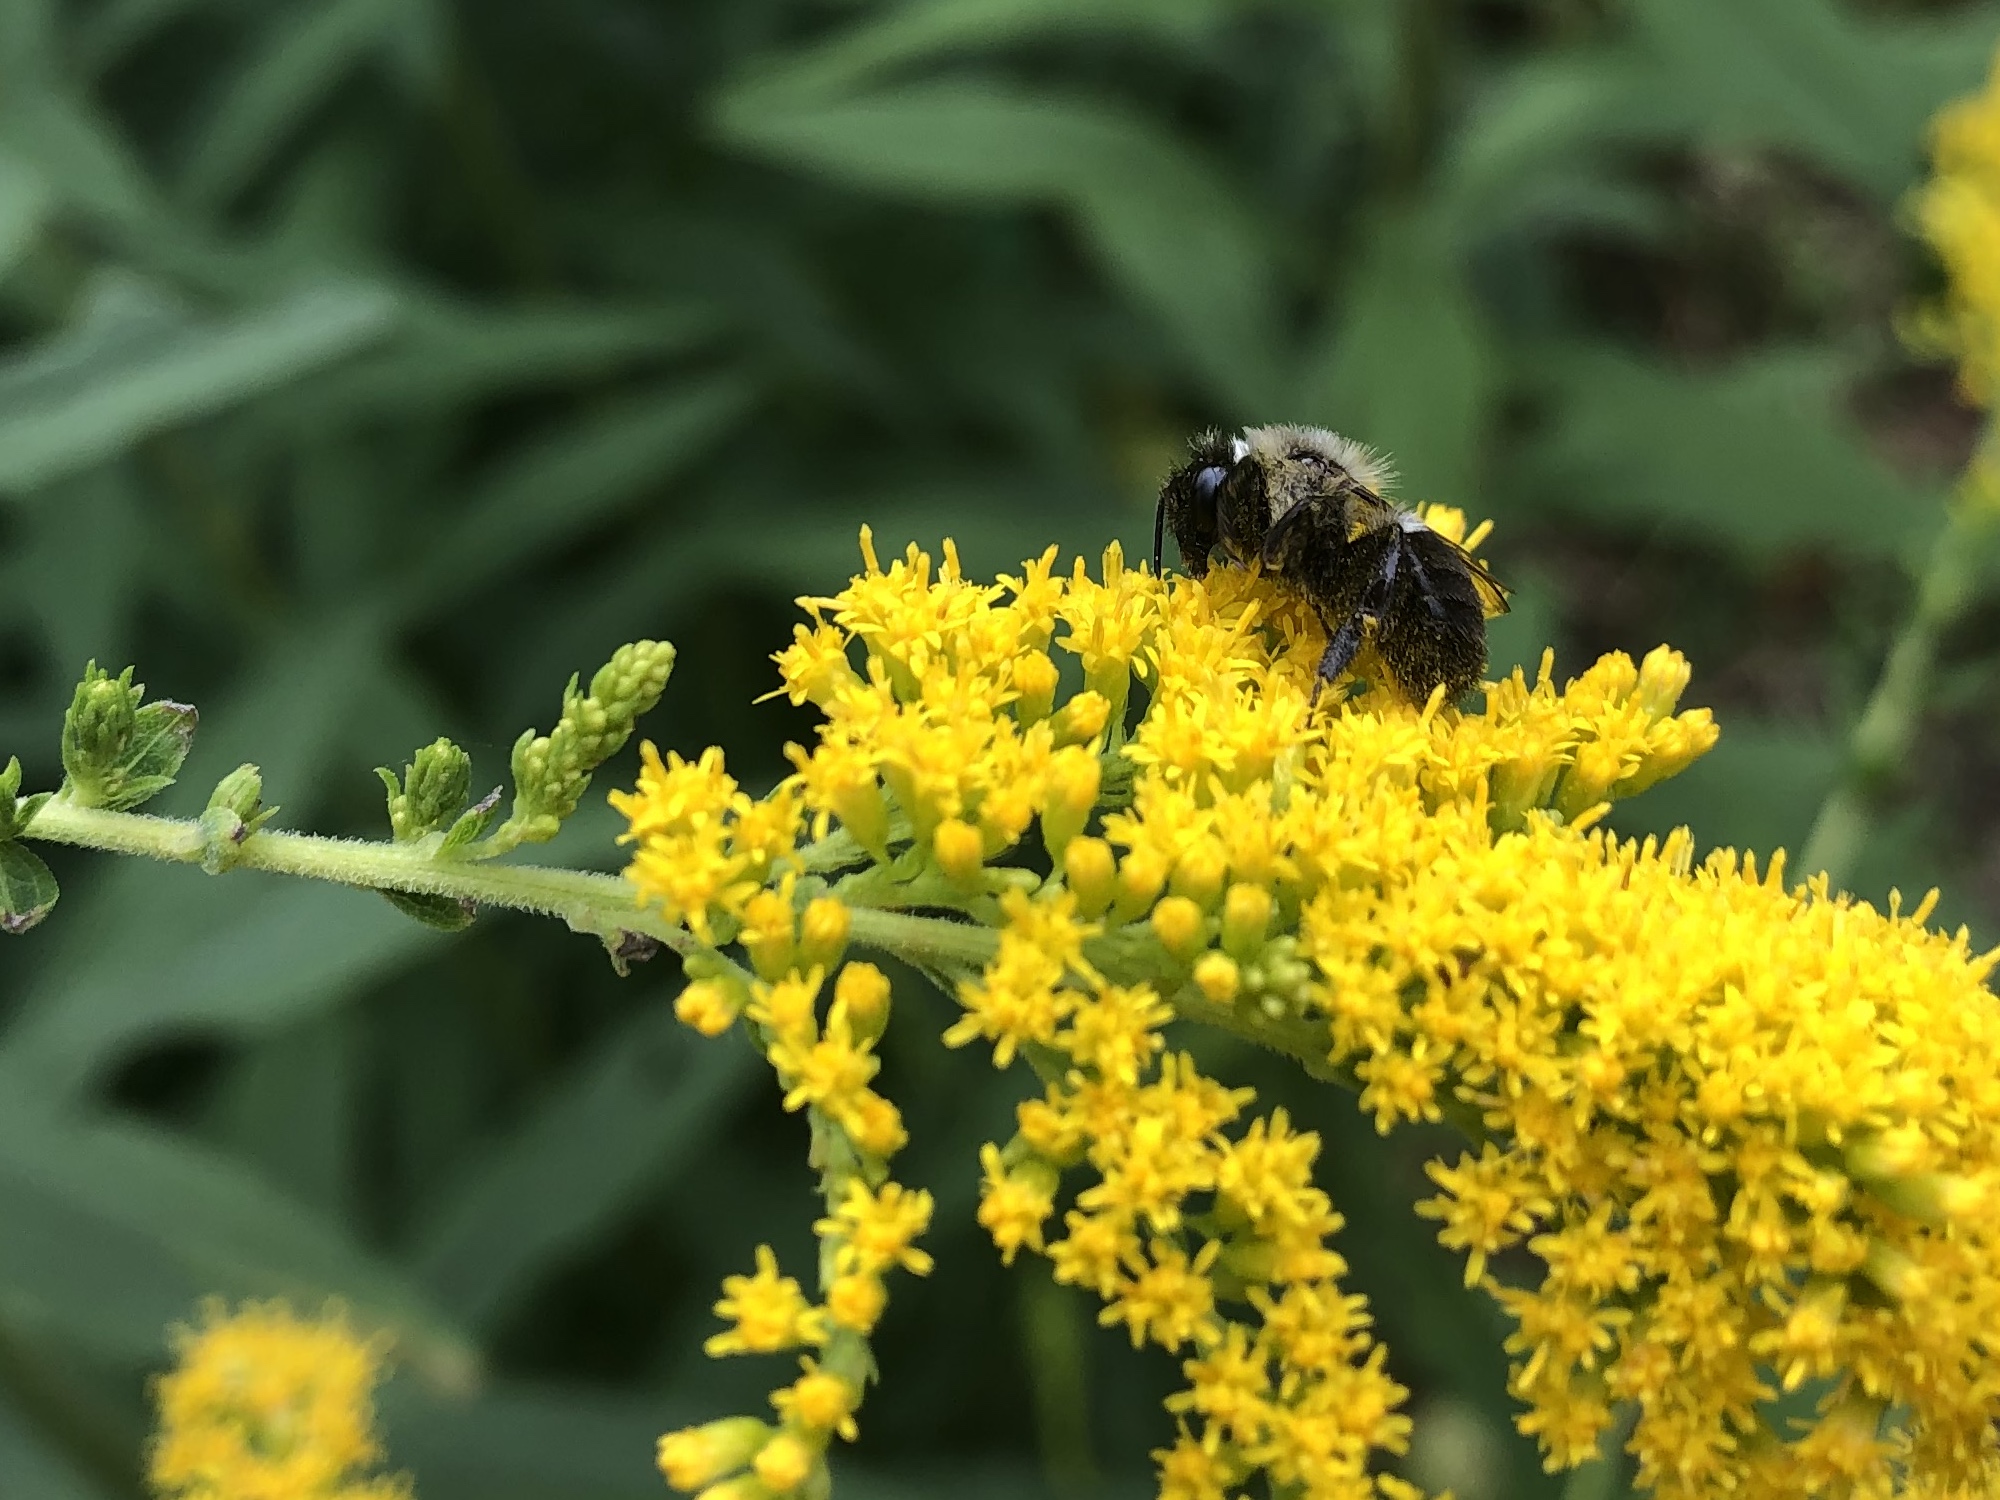 Bumblebee on Early Goldenrod on July 31, 2021.